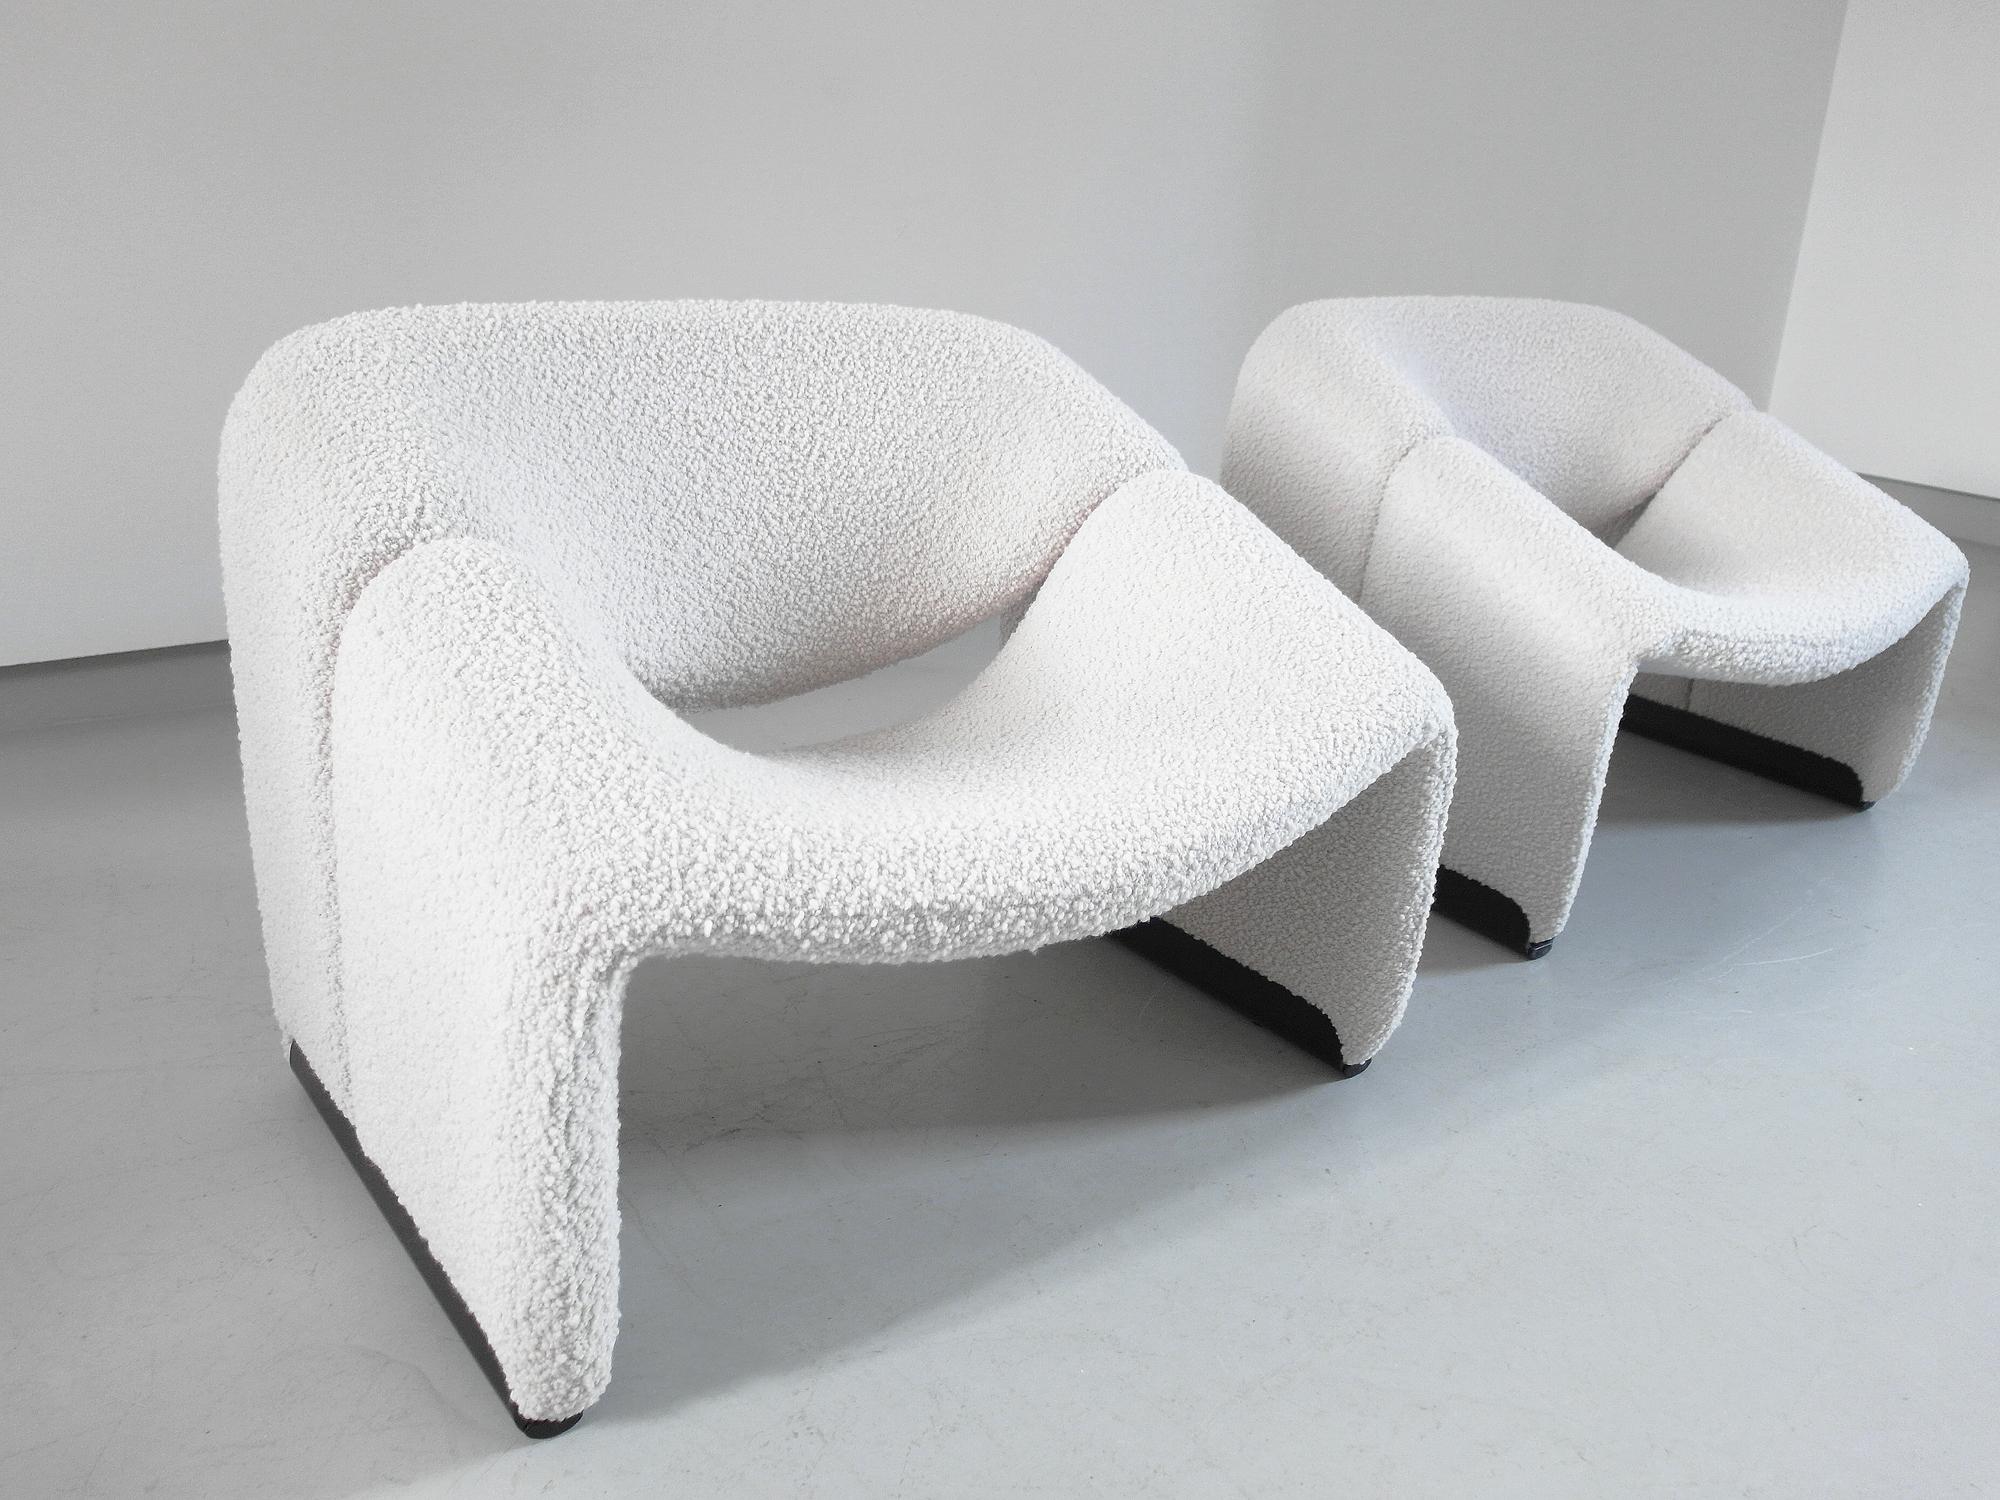 A perfect pair of boucle wool upholstered Groovy chairs, or model F598 chairs, designed by Pierre Paulin for Artifort, The Netherlands, 1973. This sculptural pair of lounge chairs has been delicately reupholstered in an ivory/crème boucle wool which